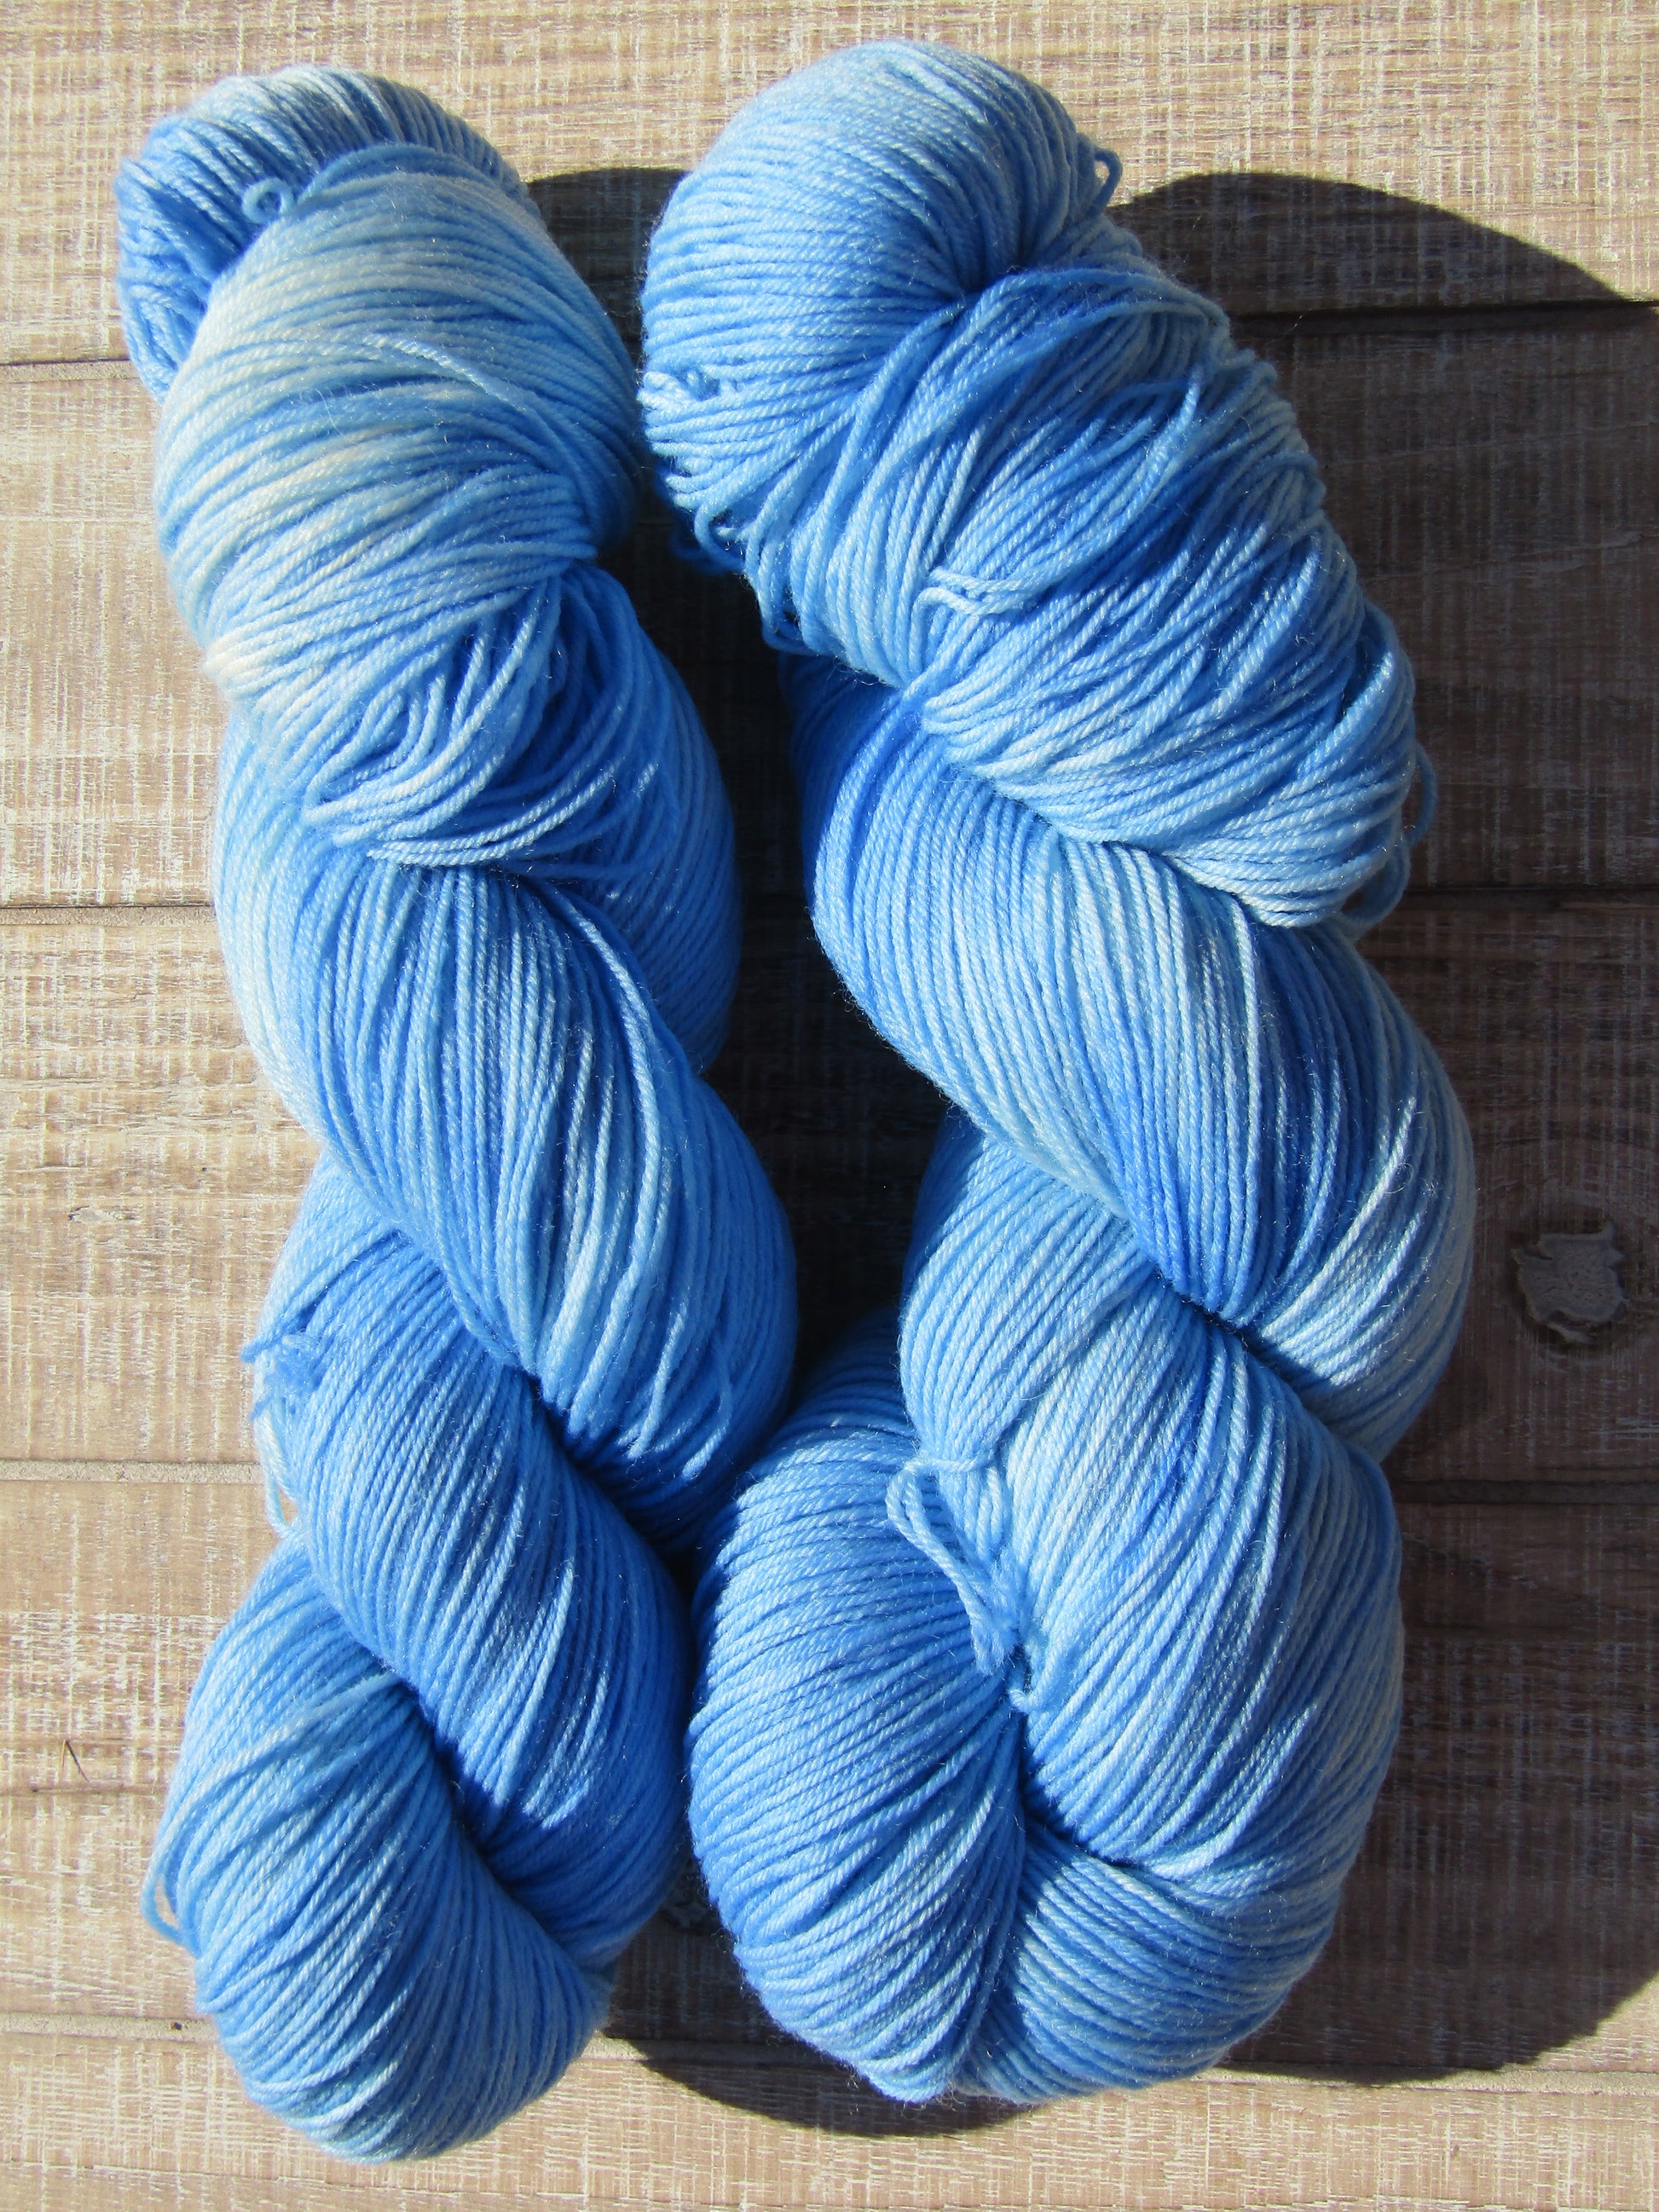 Hand-Dyed Yarn Brian is blue in color